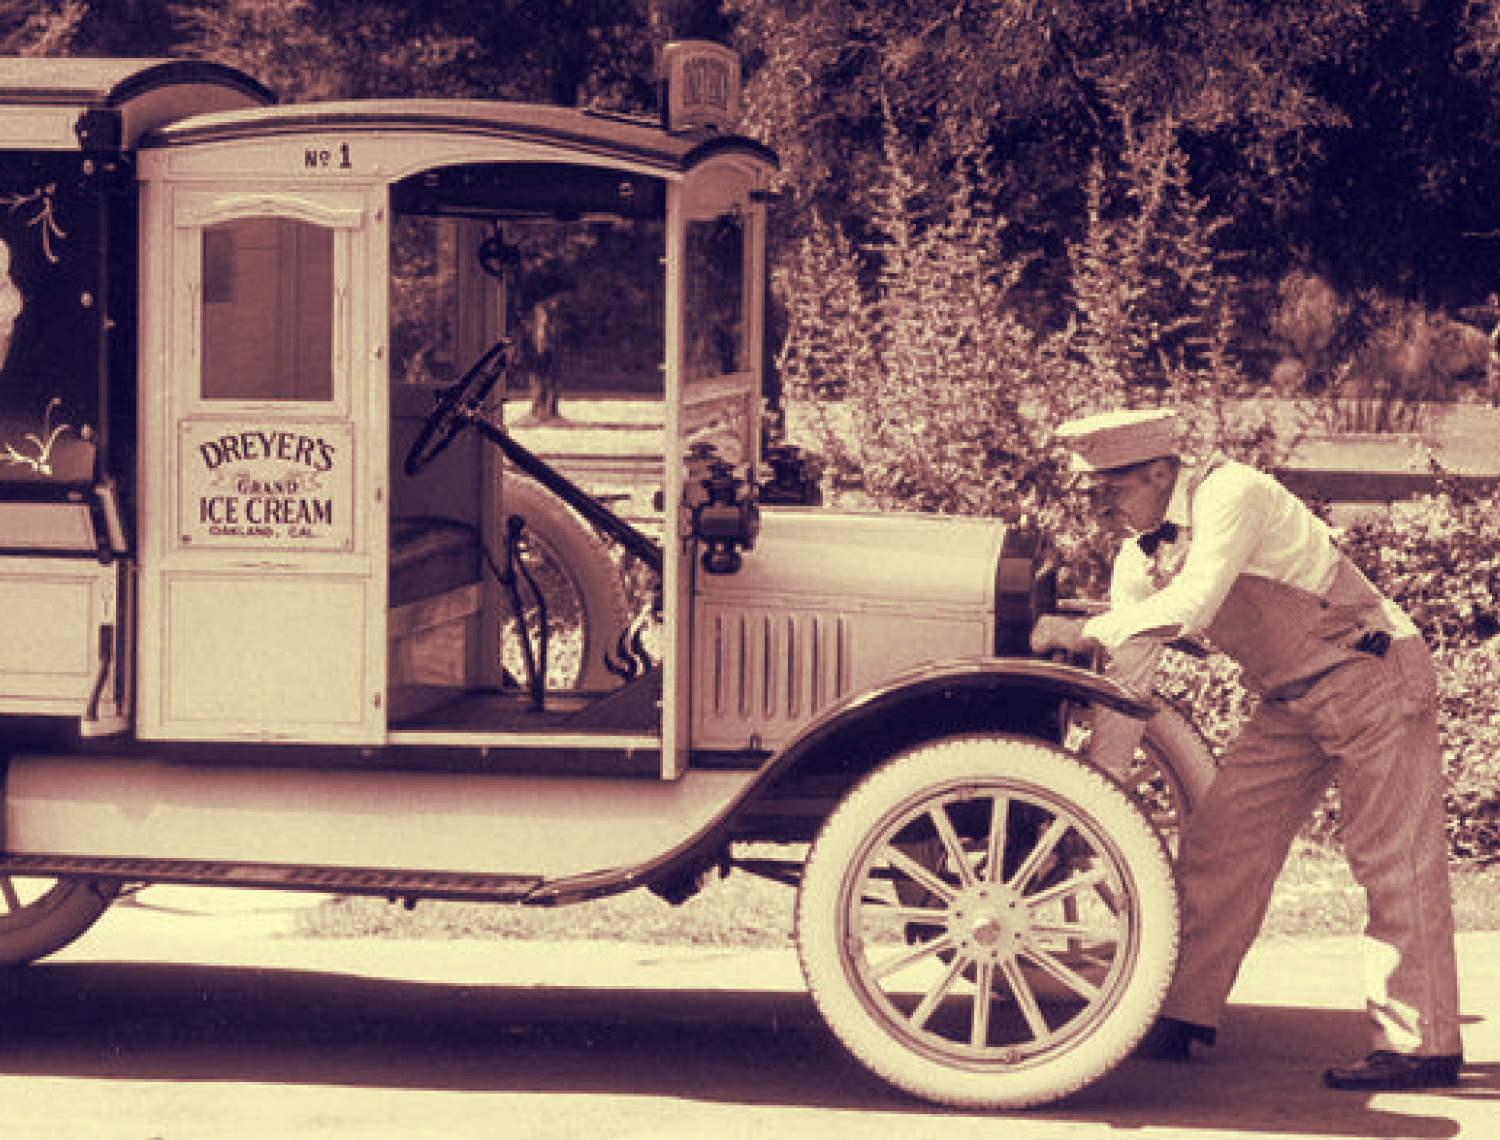 Old Photo of Dreyer's ice cream truck with a man hand cranking the engine